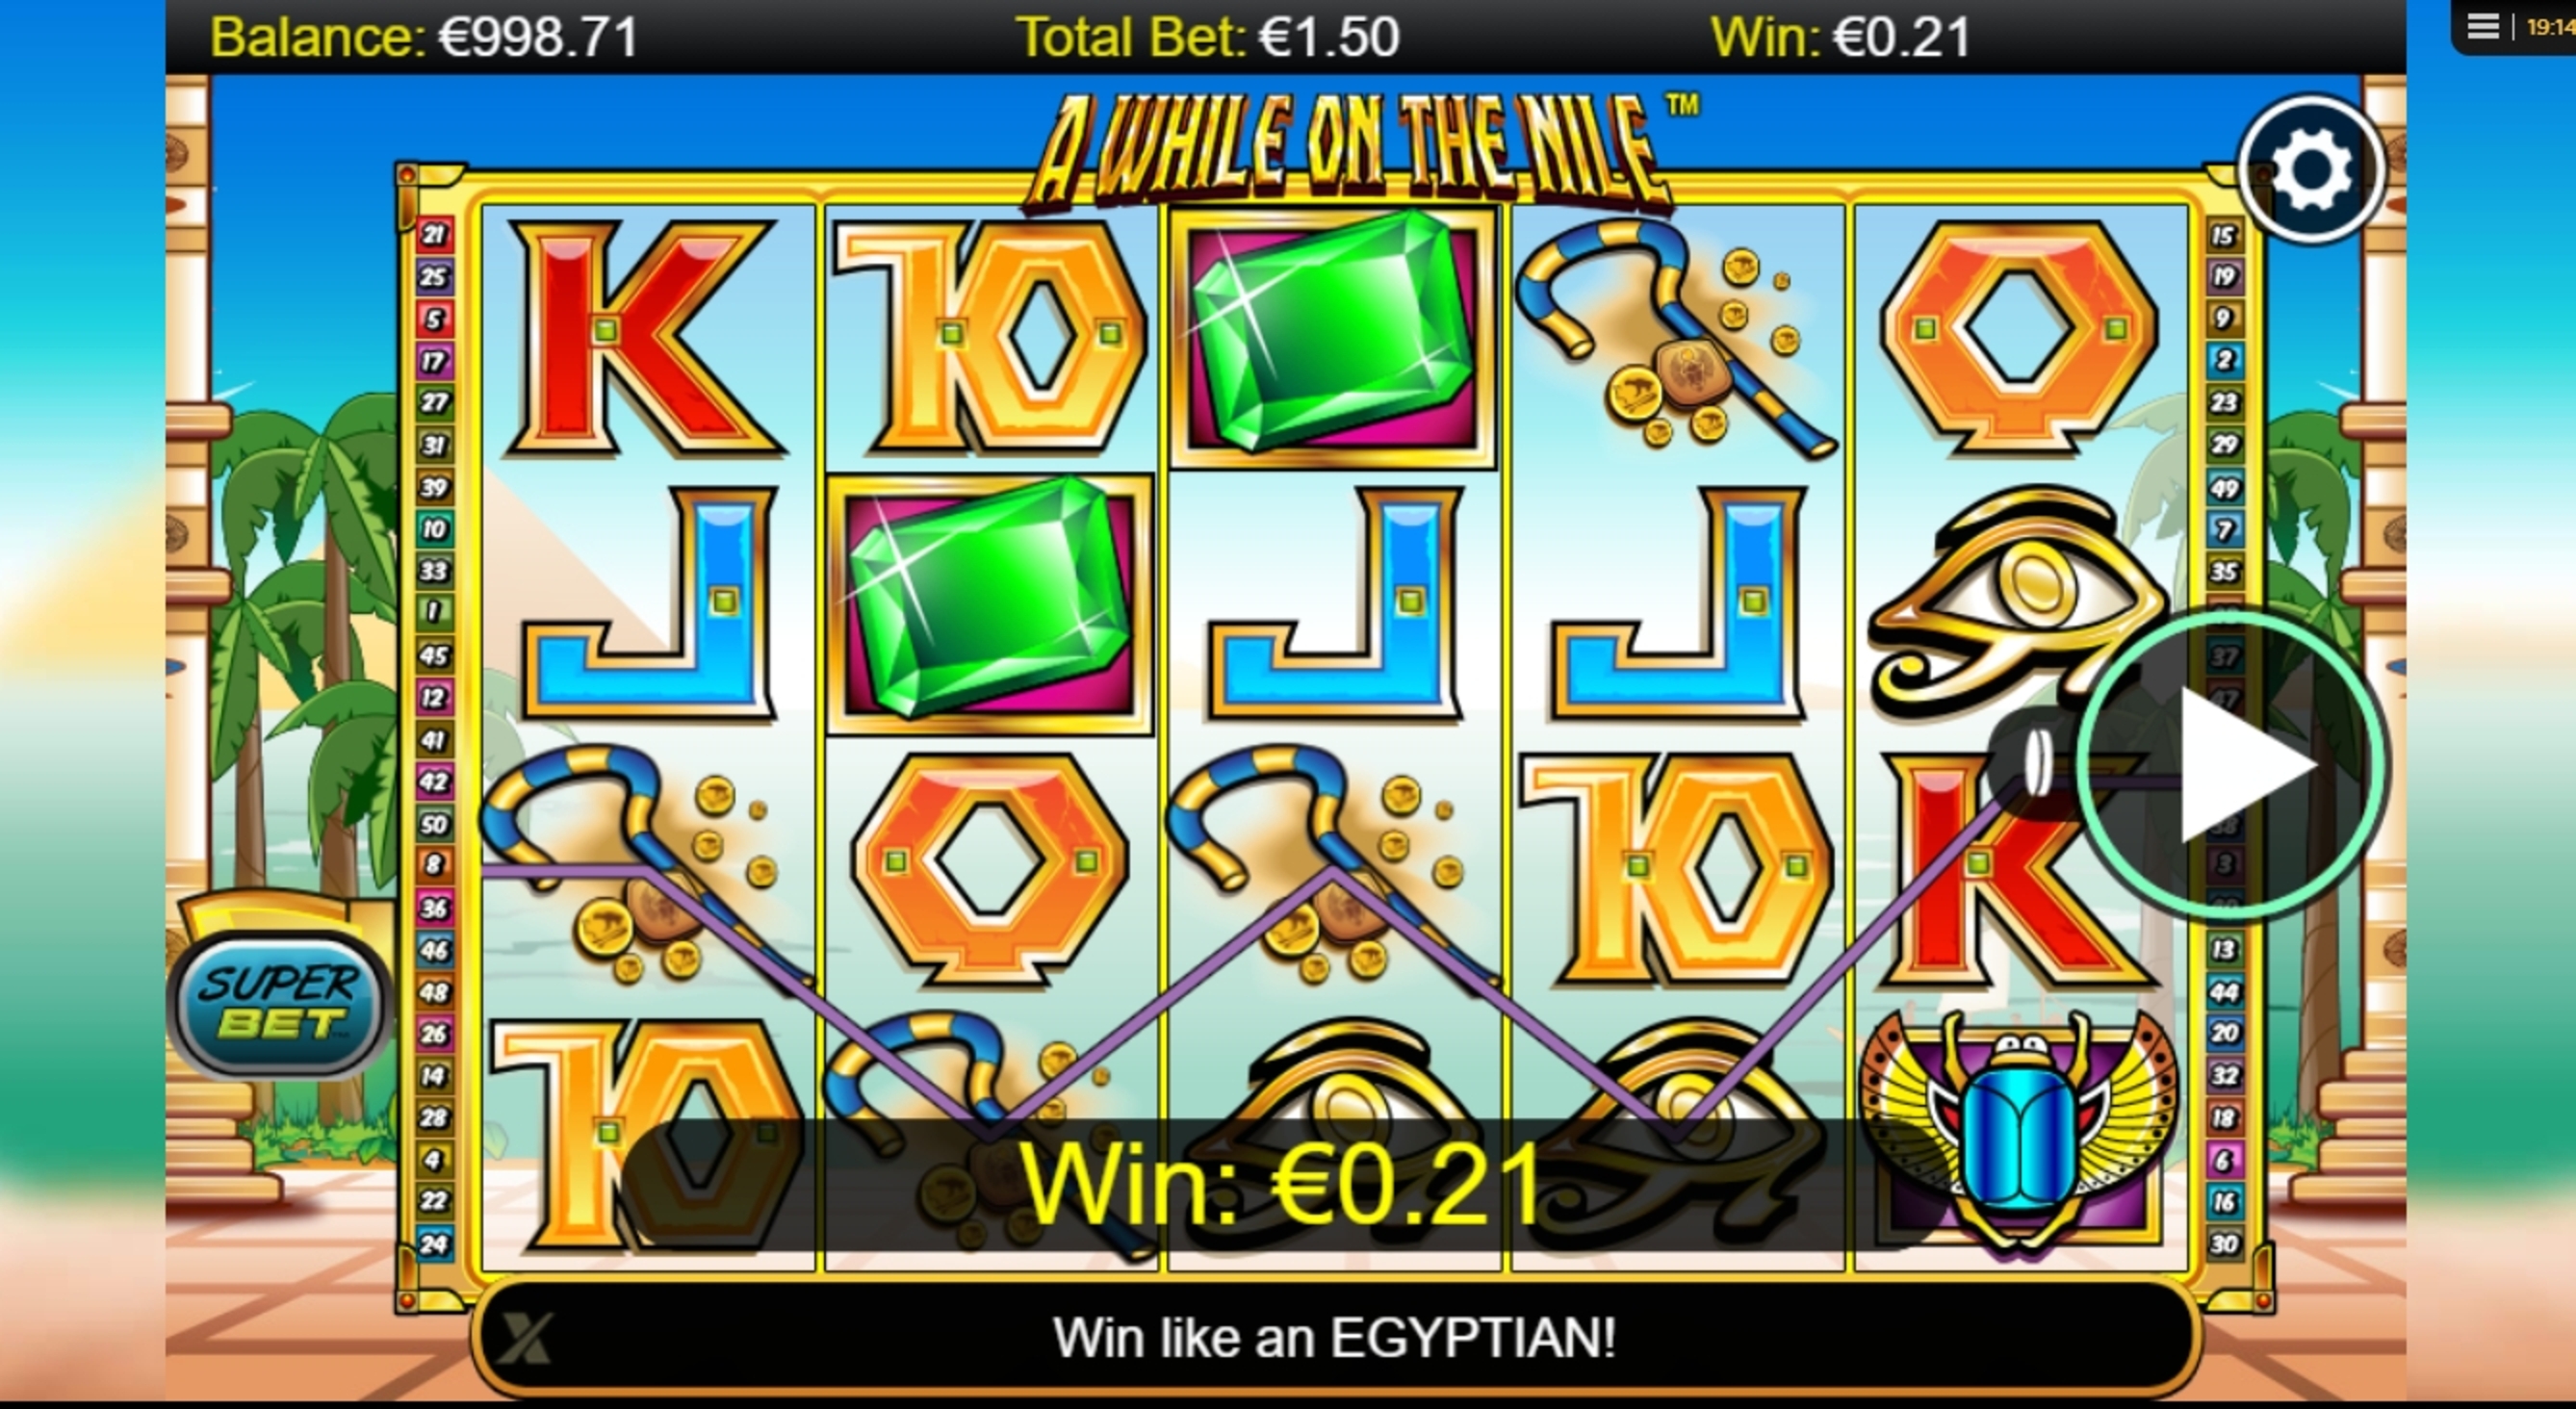 Win Money in A While On The Nile Free Slot Game by NextGen Gaming